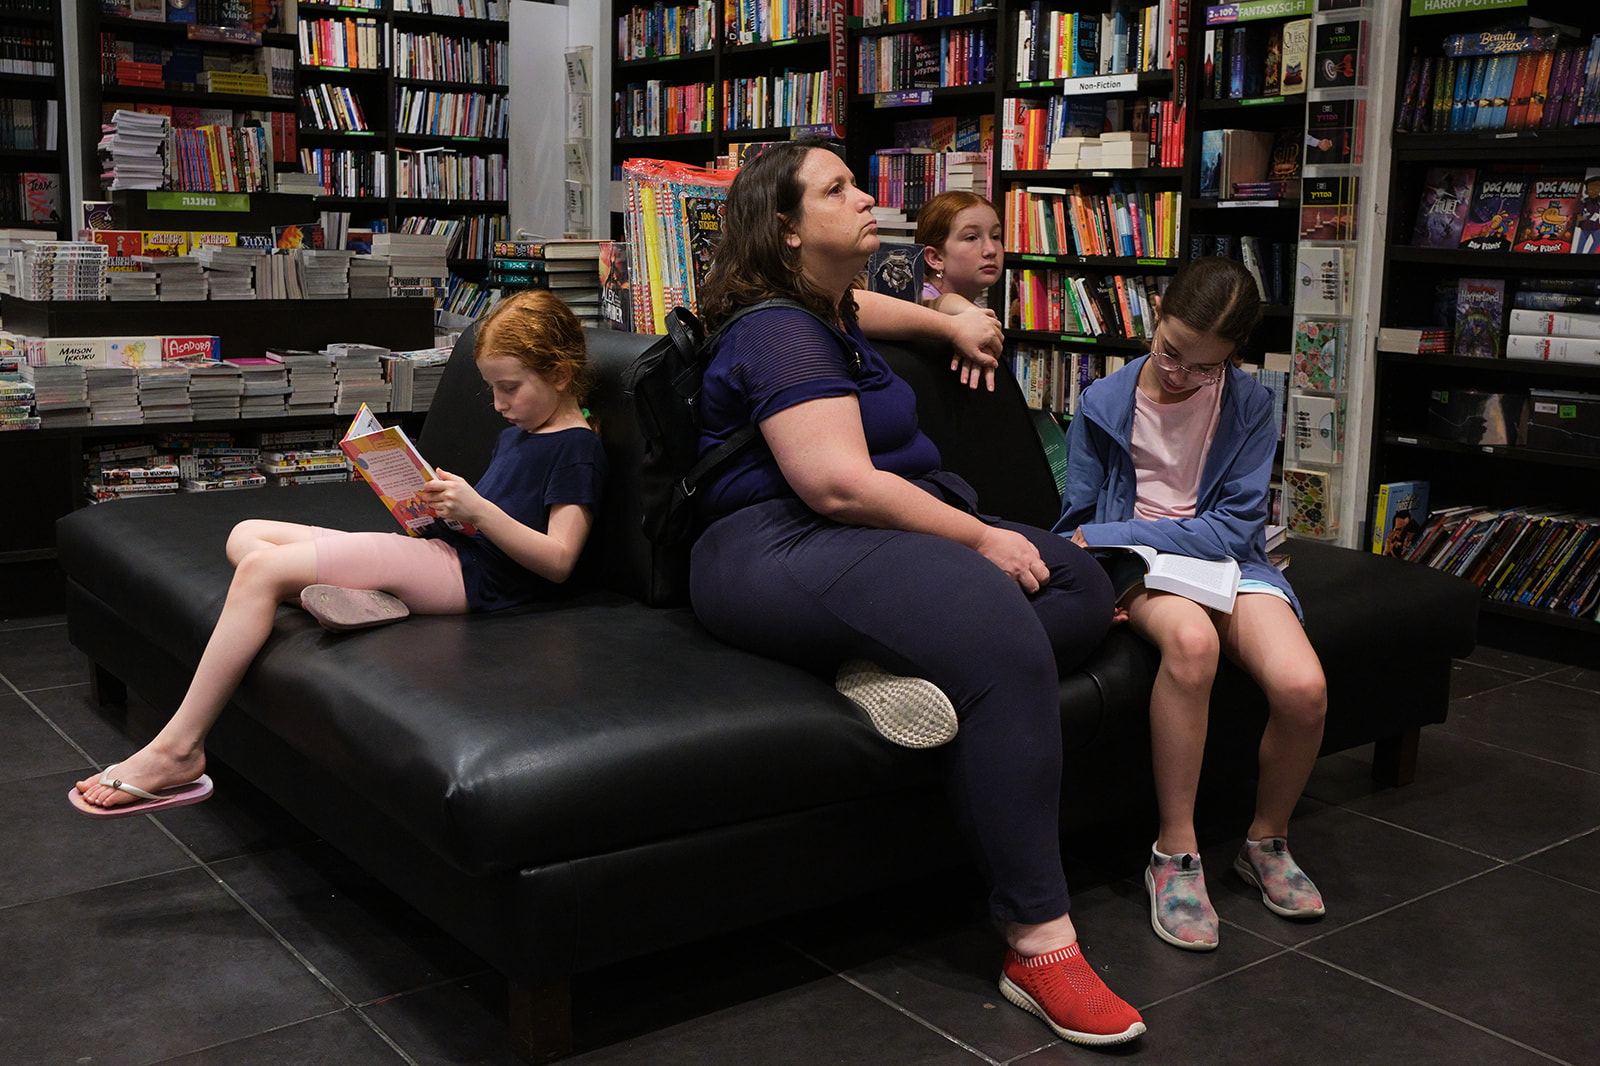 a mother and three girls sitting on a couch in a book shop reading